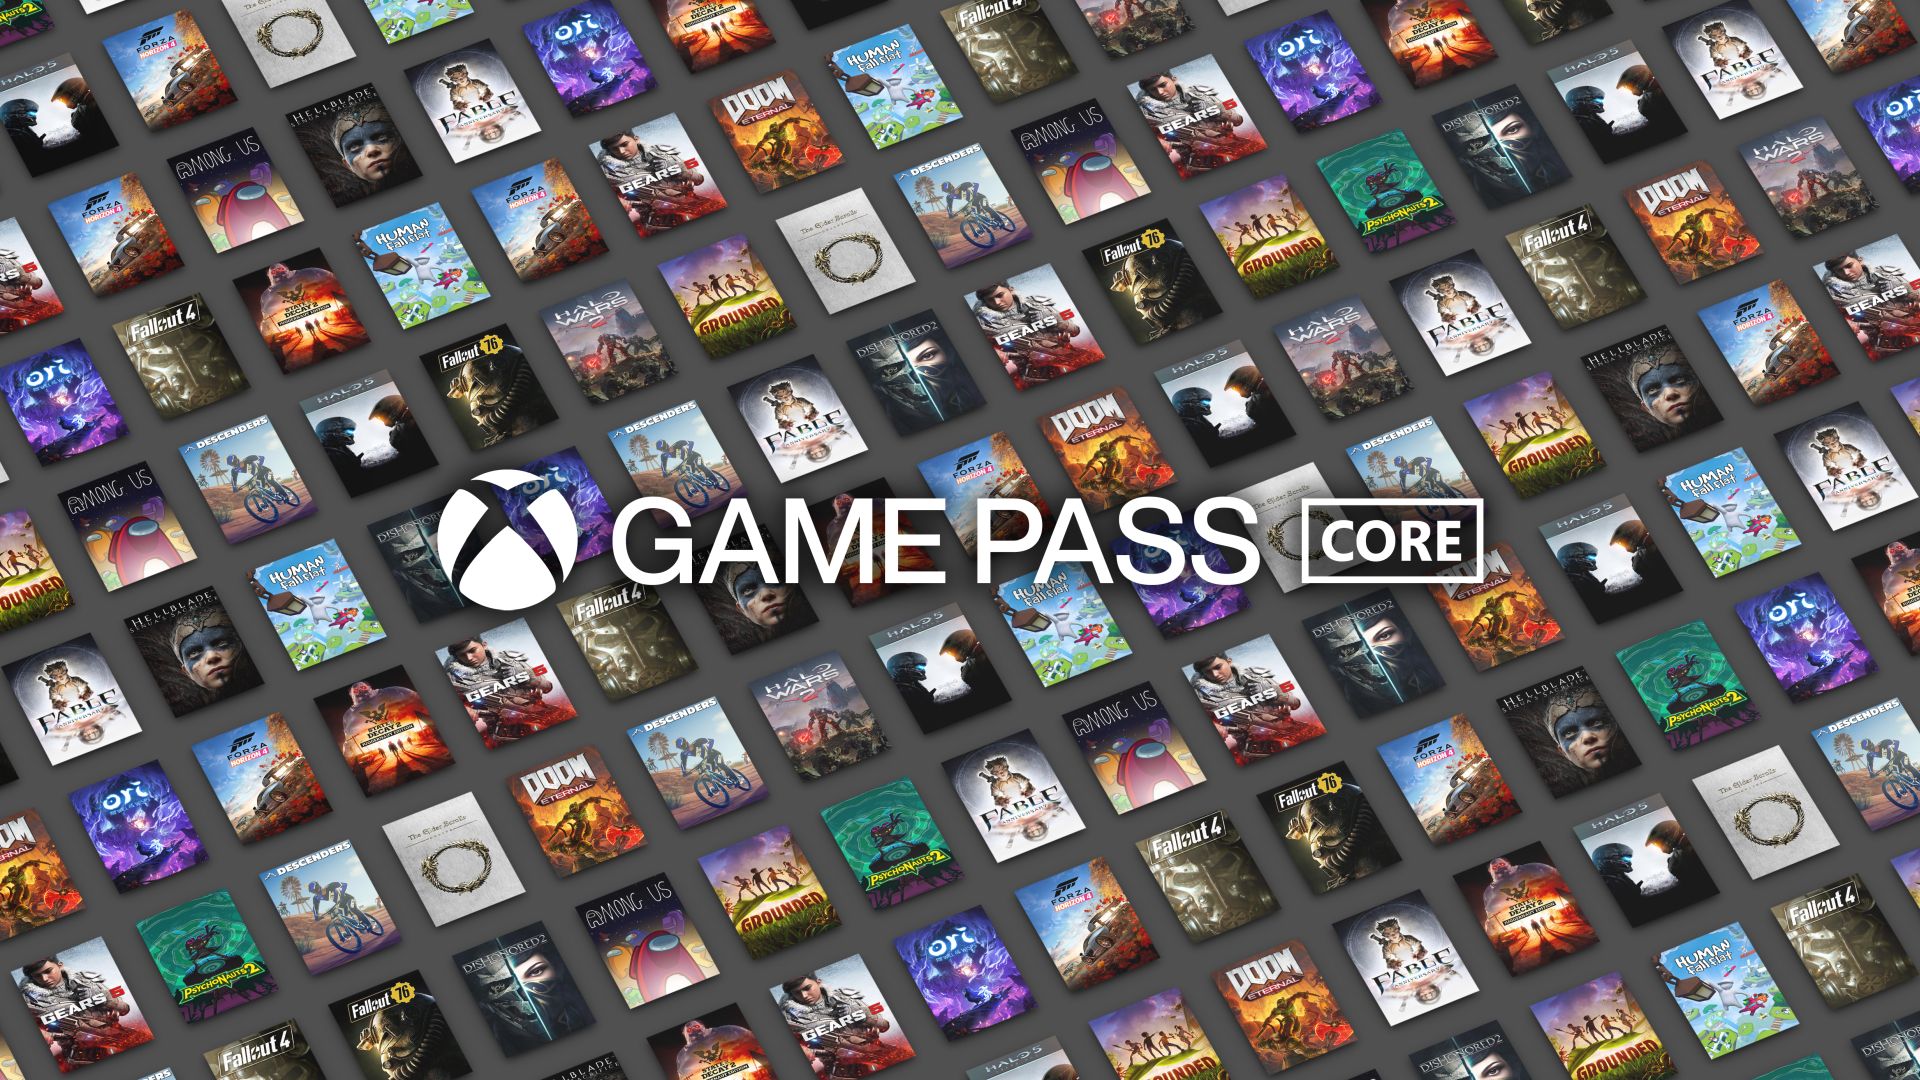 Hulu Subscribers Can Get Xbox's PC Game Pass for Free for 3 Months